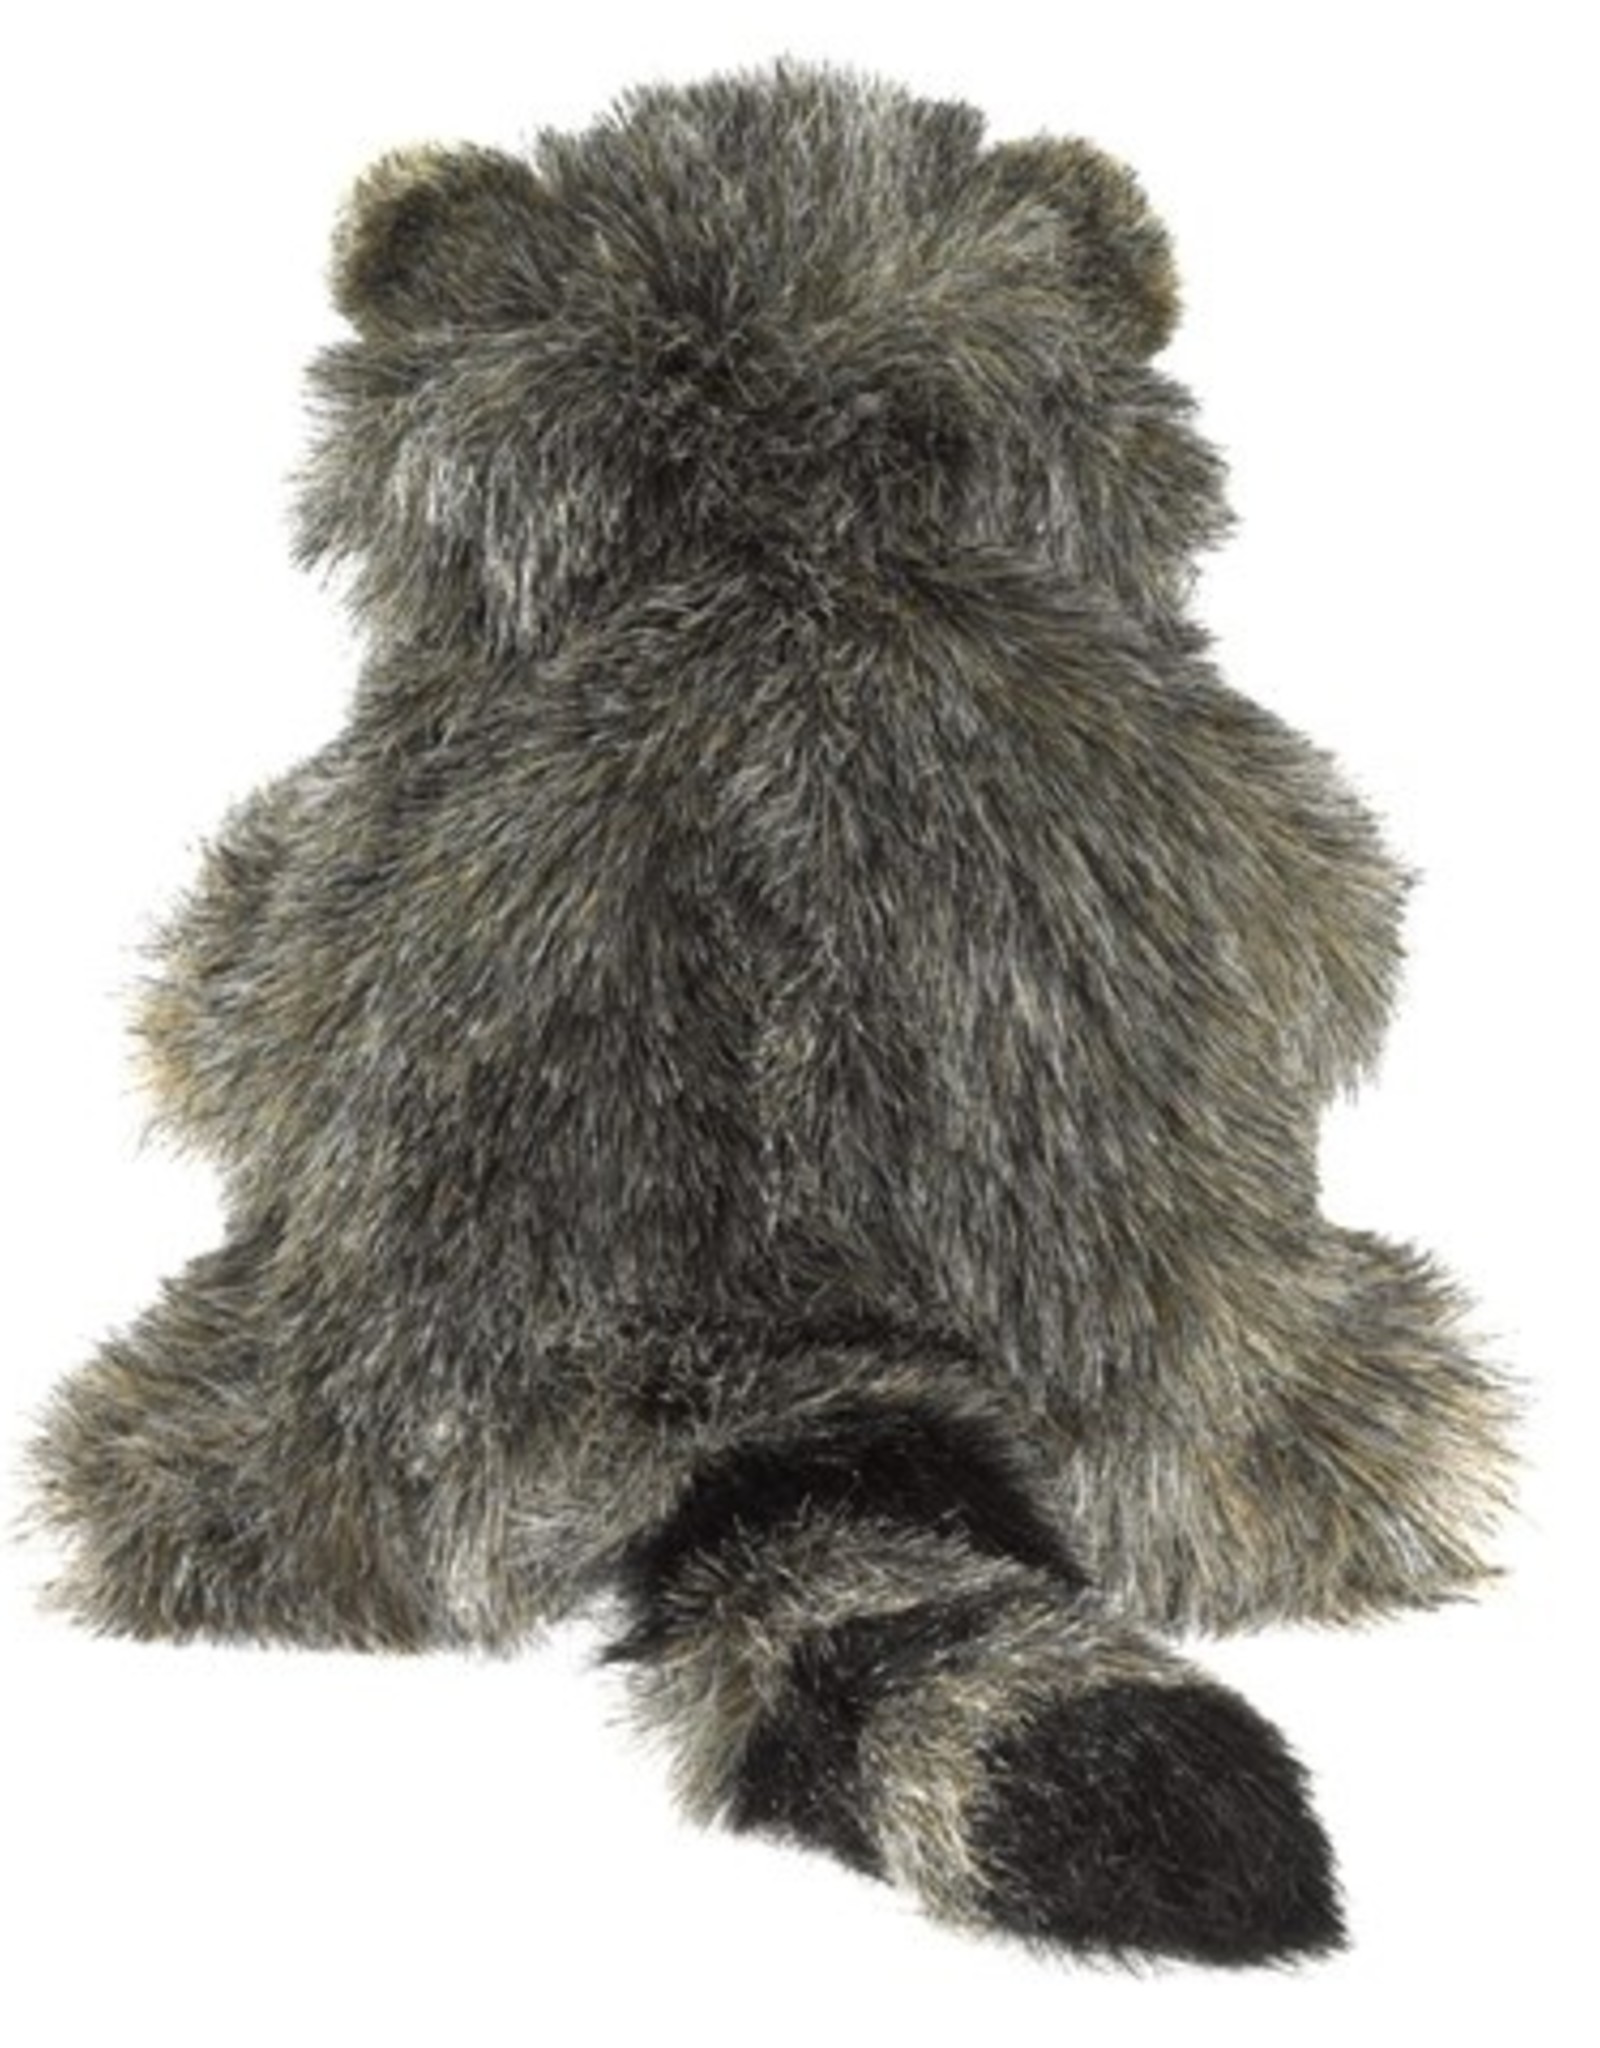 Folkmanis Baby Racoon Hand Puppet